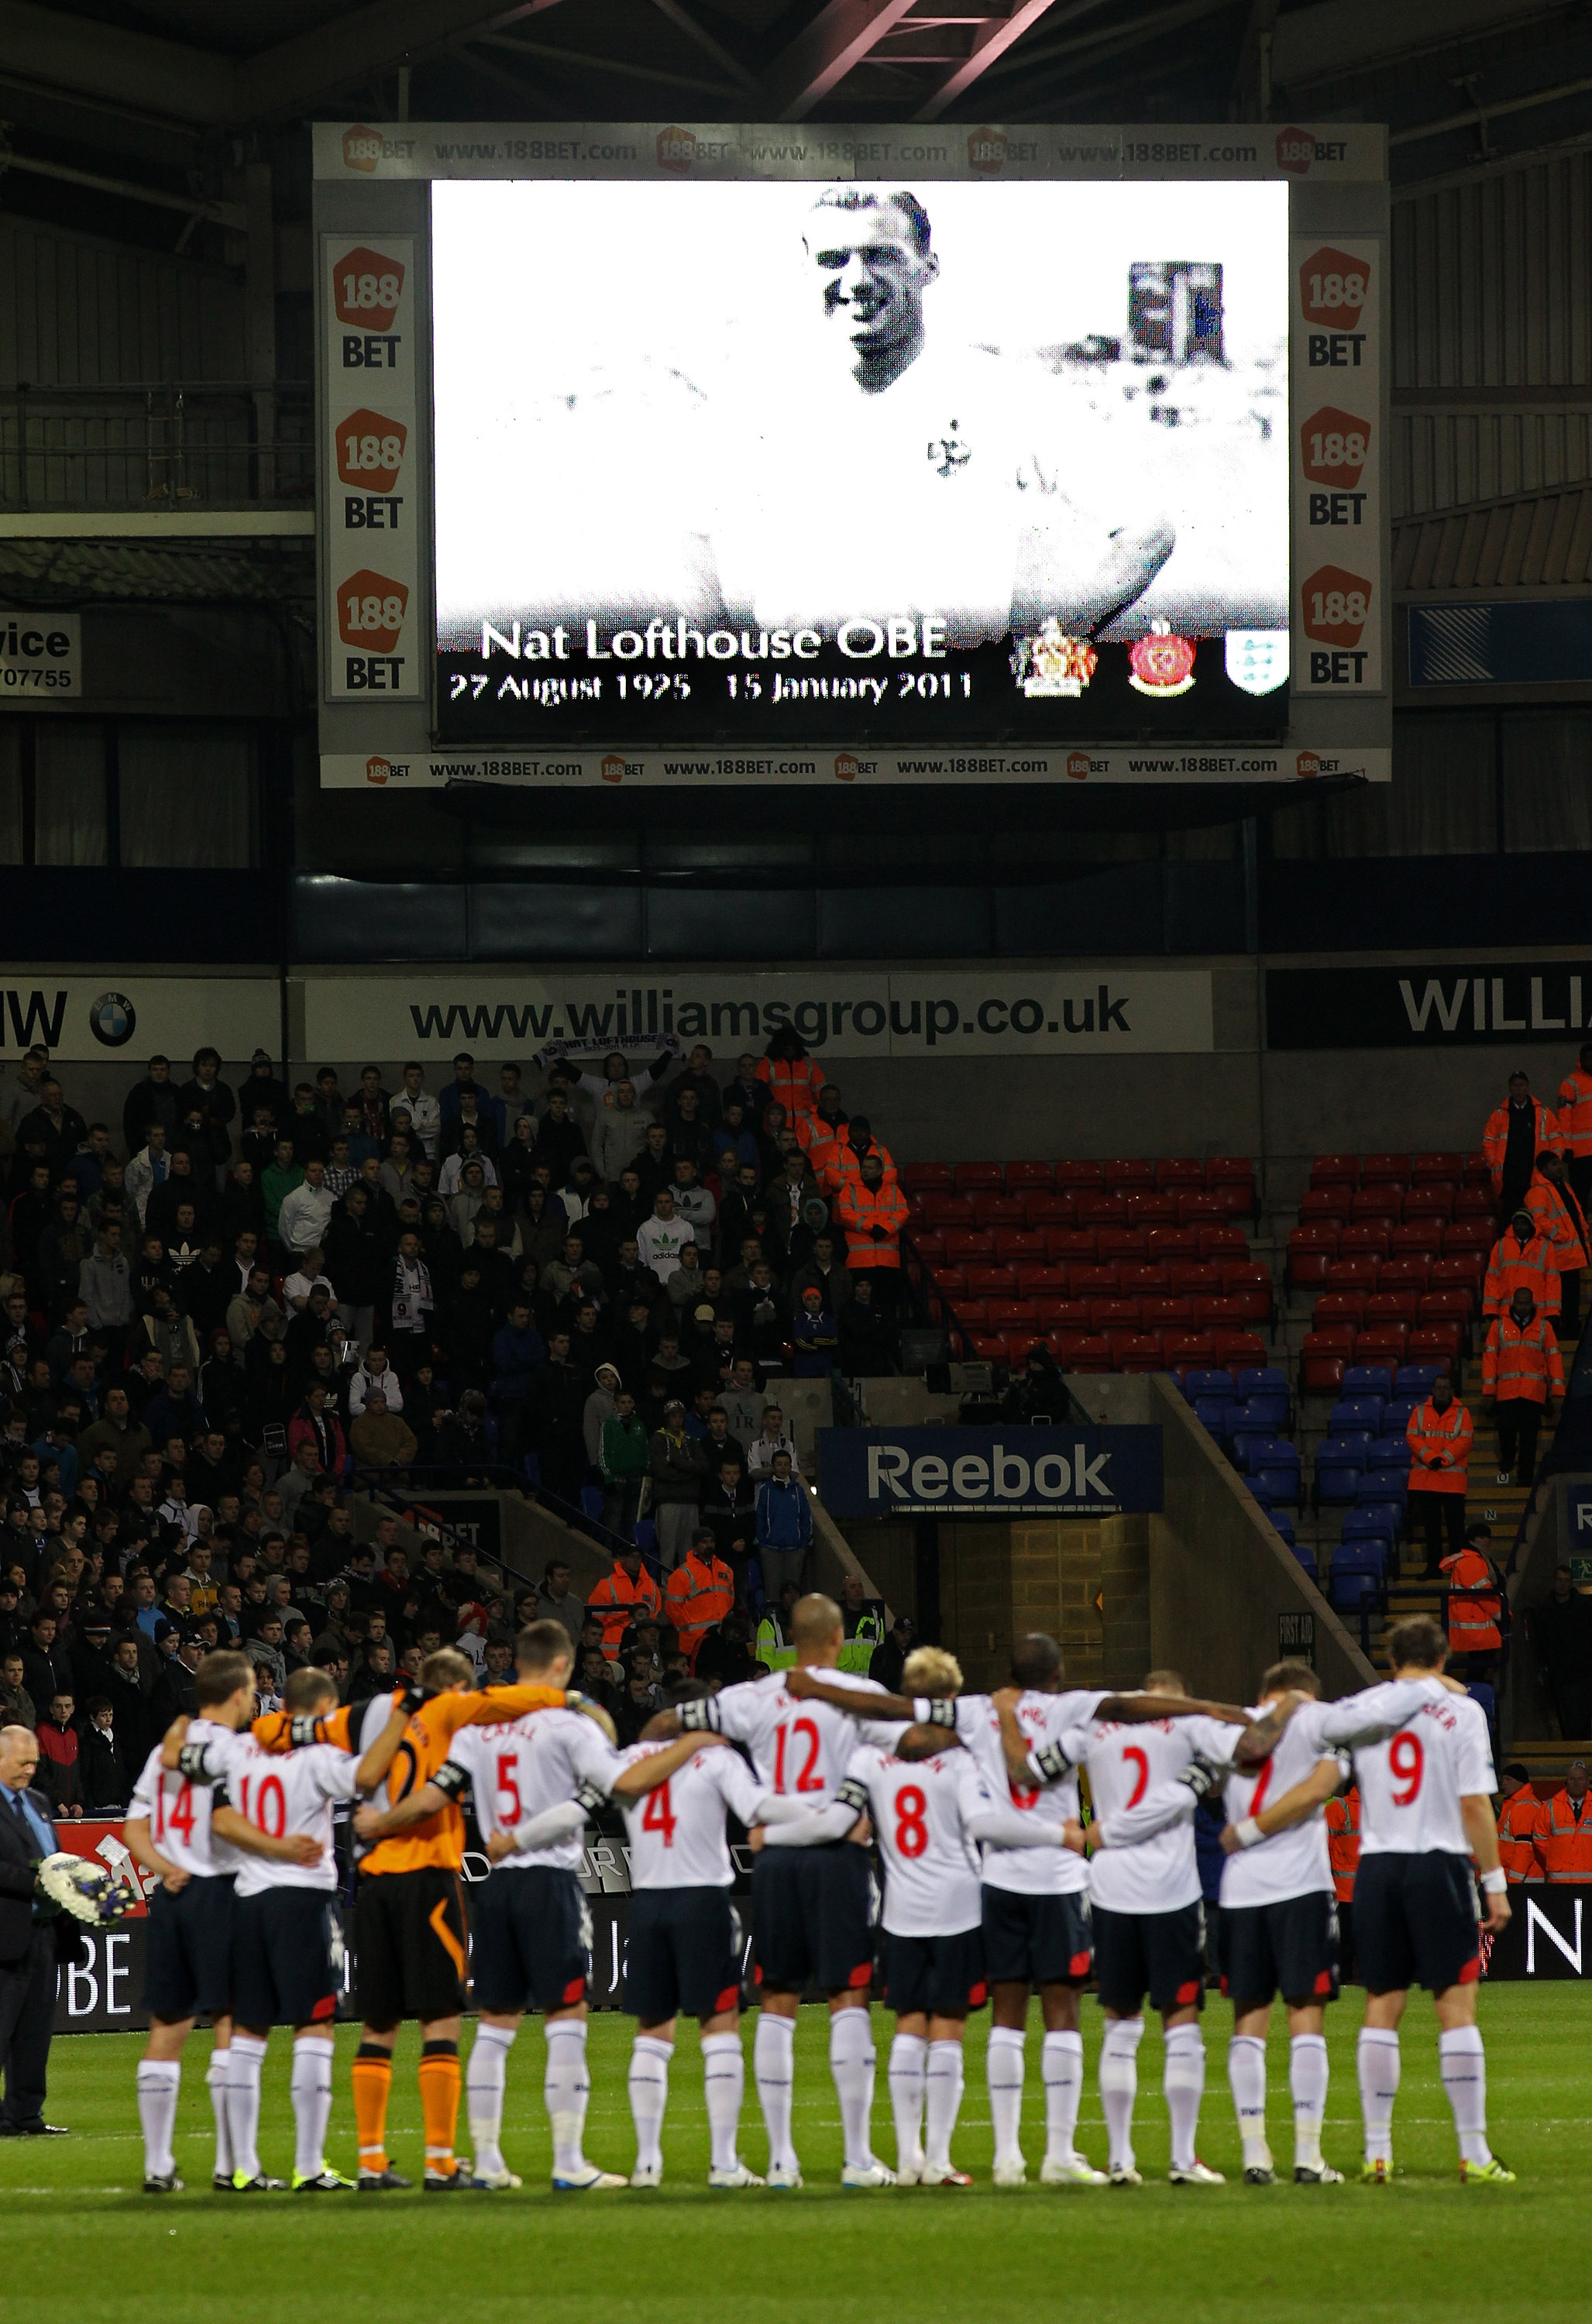 BOLTON, ENGLAND - JANUARY 24:  The Bolton Wanderers players observes a minutes silence for the late Nat Lofthouse prior to the Barclays Premier League match between Bolton Wanderers and Chelsea at the Reebok Stadium on January 24, 2011 in Bolton, England.